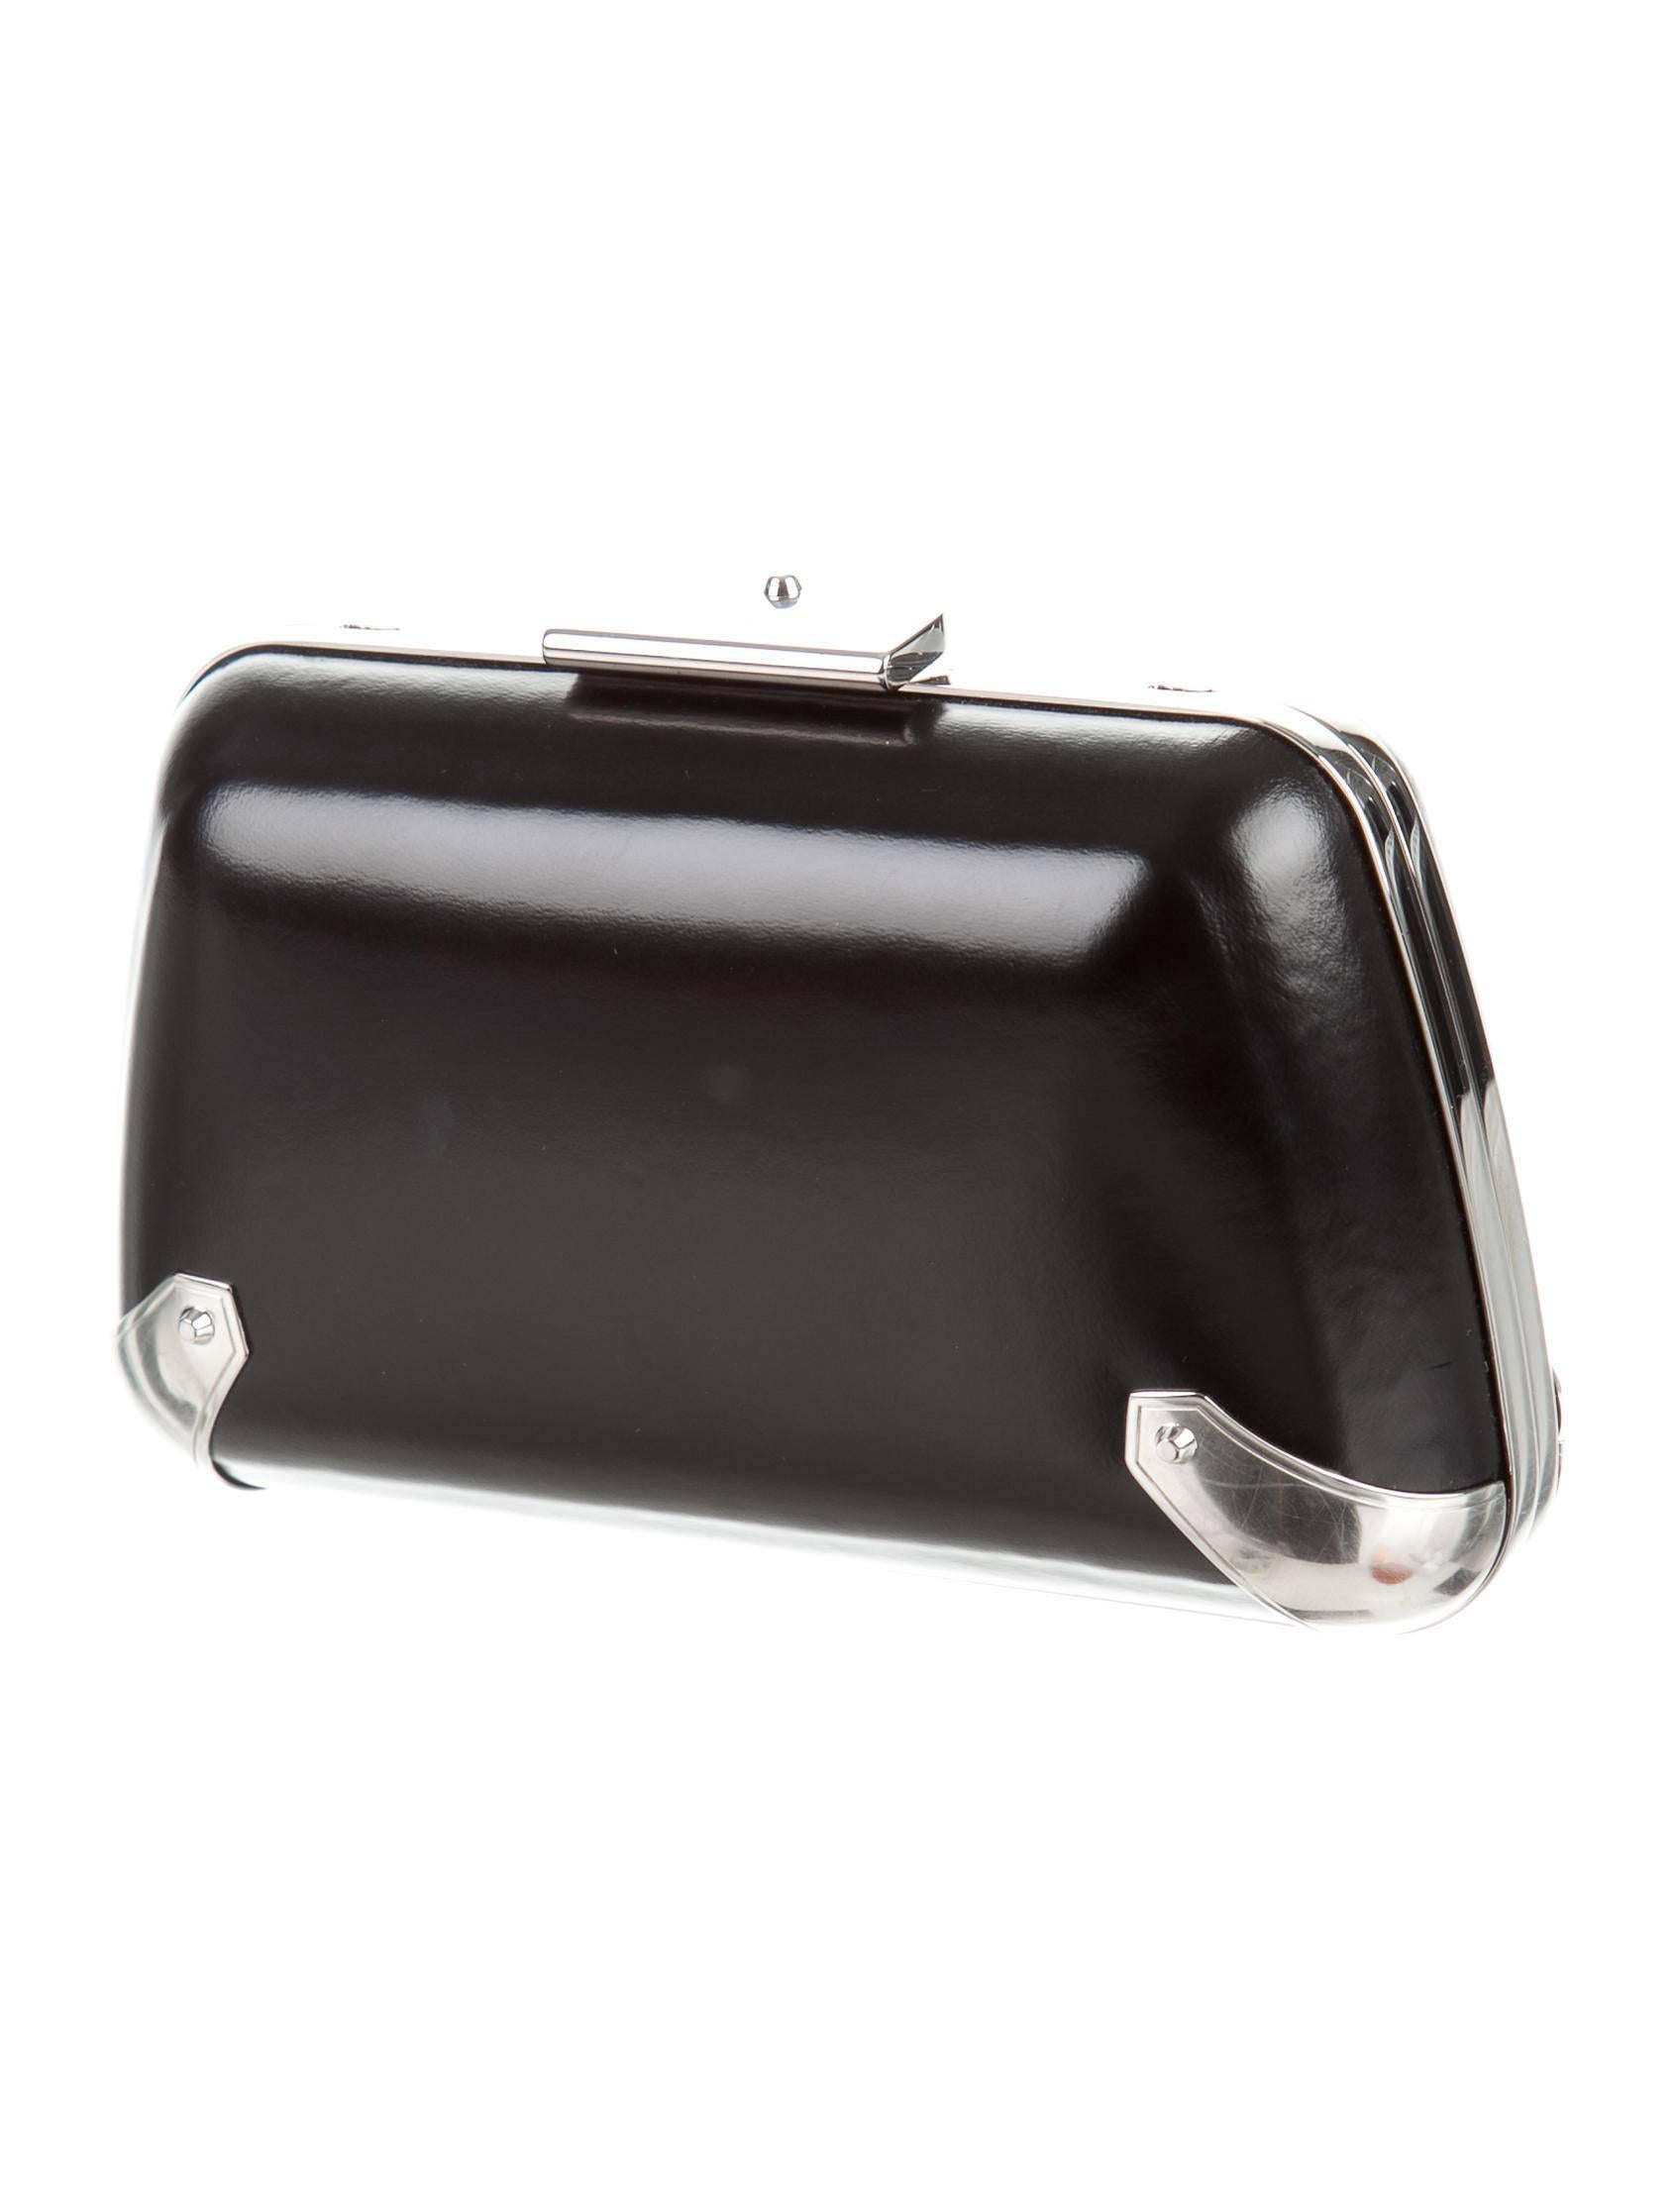 CURATOR'S NOTES

Balenciaga NEW Black Leather Silver Evening Pill Chain Shoulder Clutch Bag  

Leather
Silver tone hardware
Suede interior
Push lock closure 
Measures 6.5" W x 4.25" H x 2.25" D
Removable shoulder strap